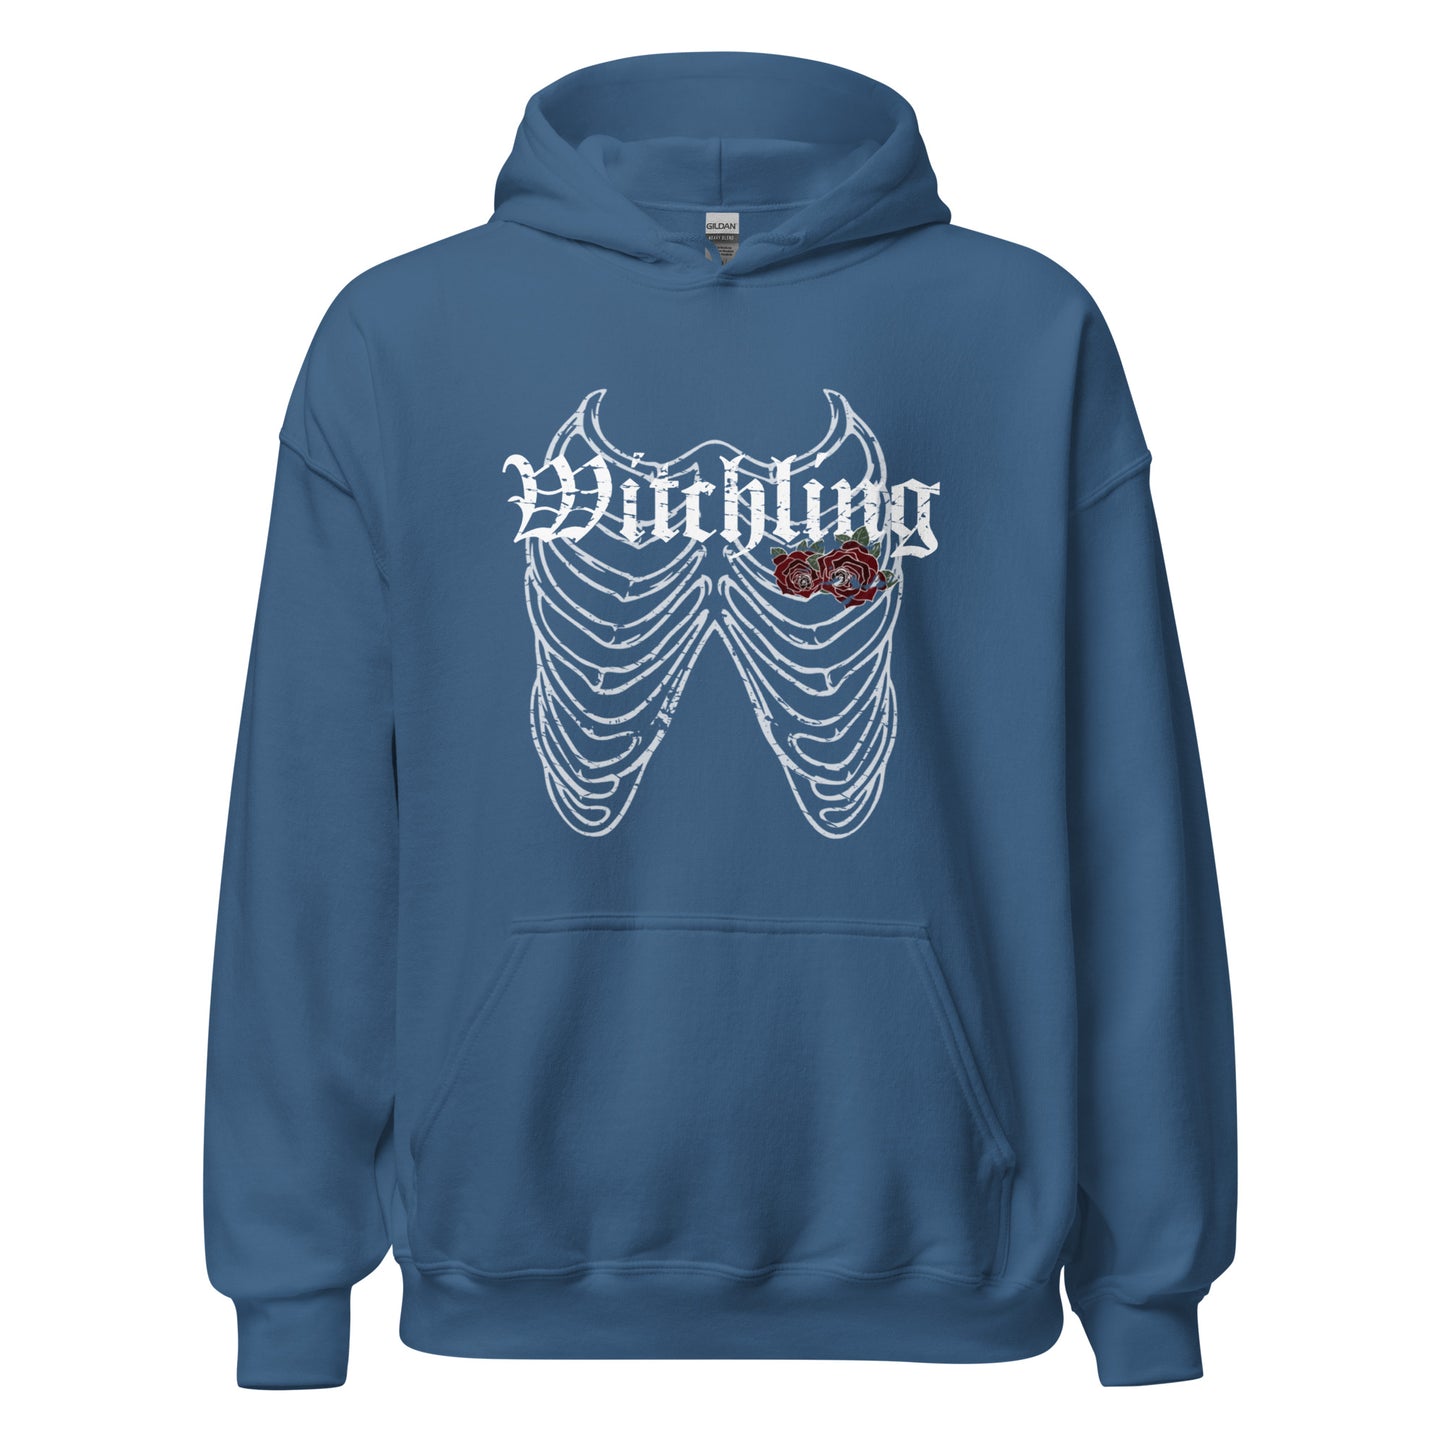 Witchling -The Coven - Unisex Hoodie